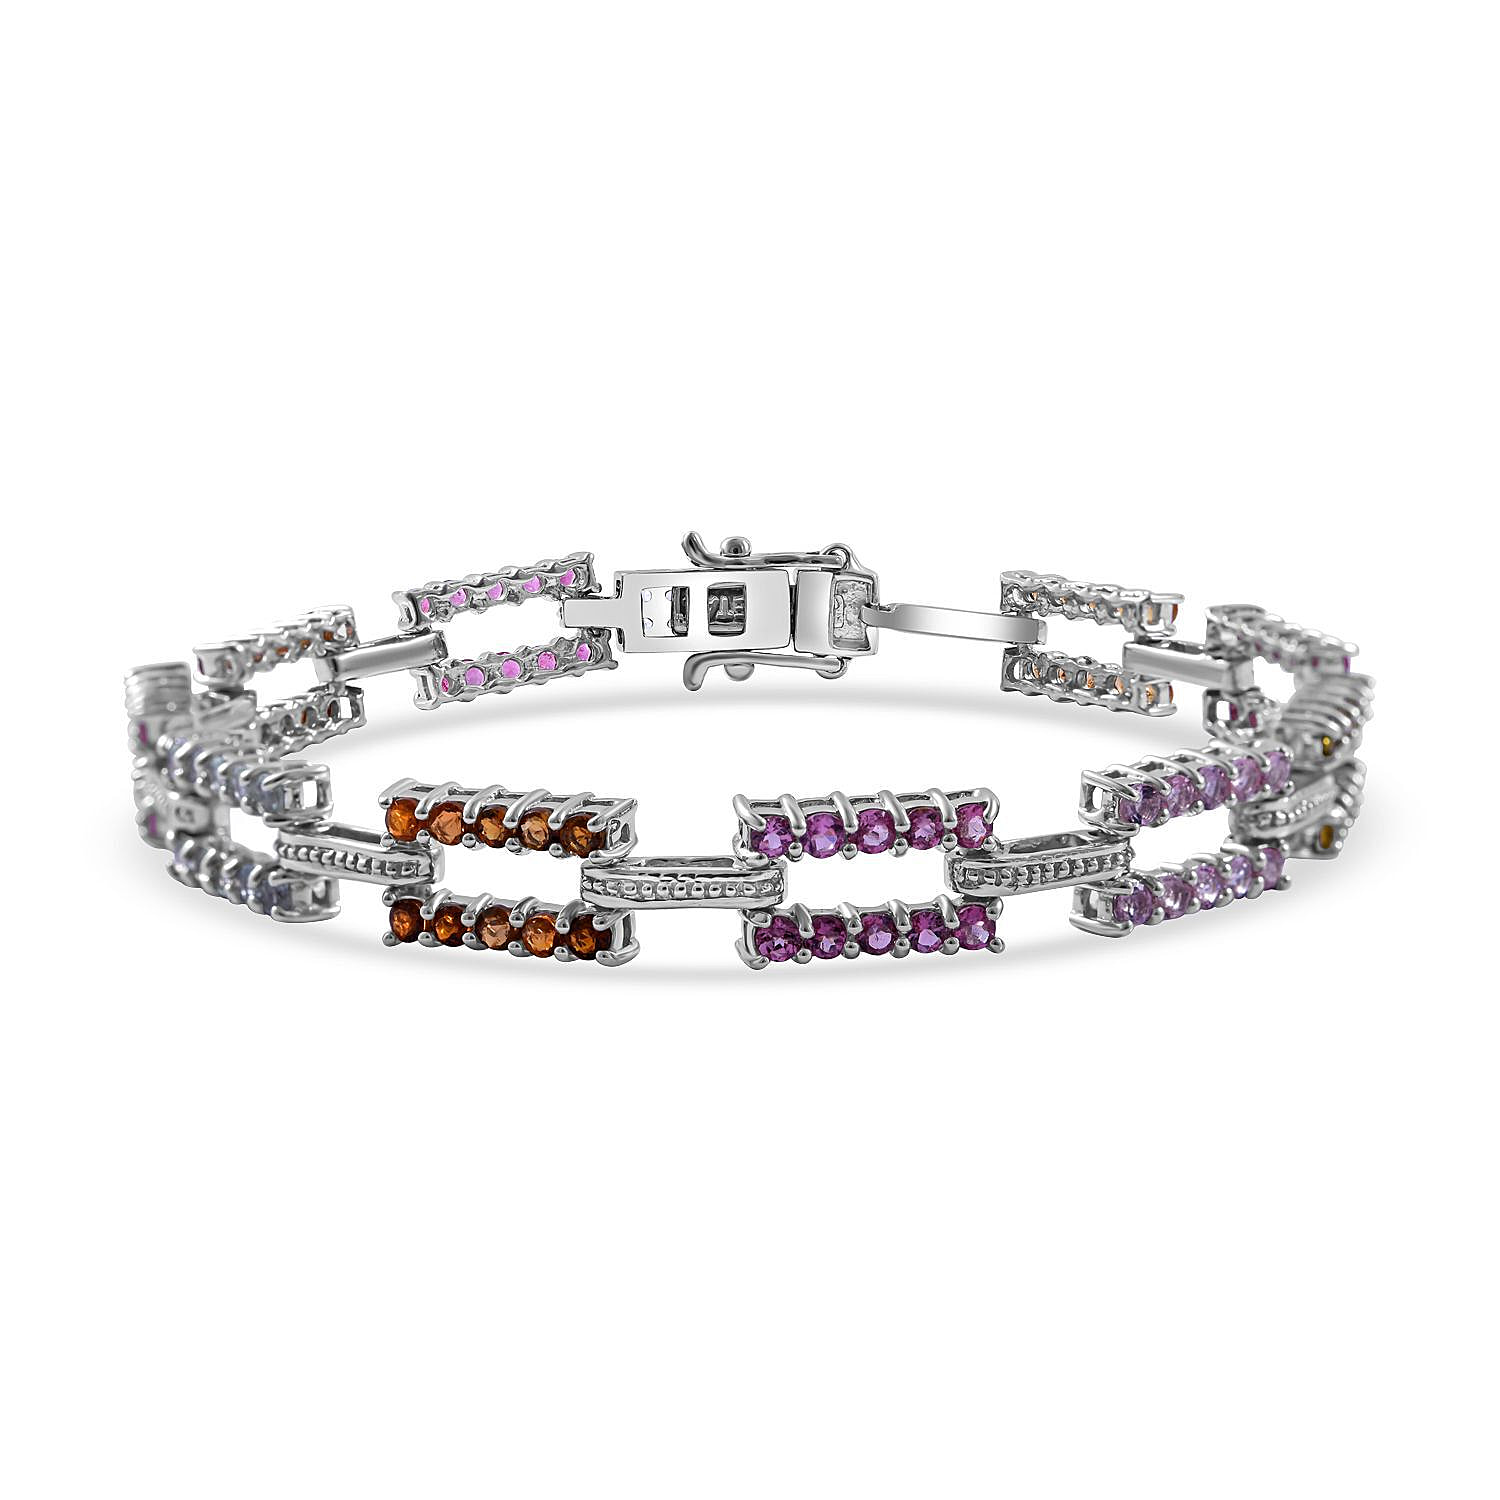 Multi-Tourmaline and Natural Zircon Bracelet (Size - 7.5) in Rhodium Overlay Sterling Silver 3.75 Ct, Silver Wt 13.00 Gms